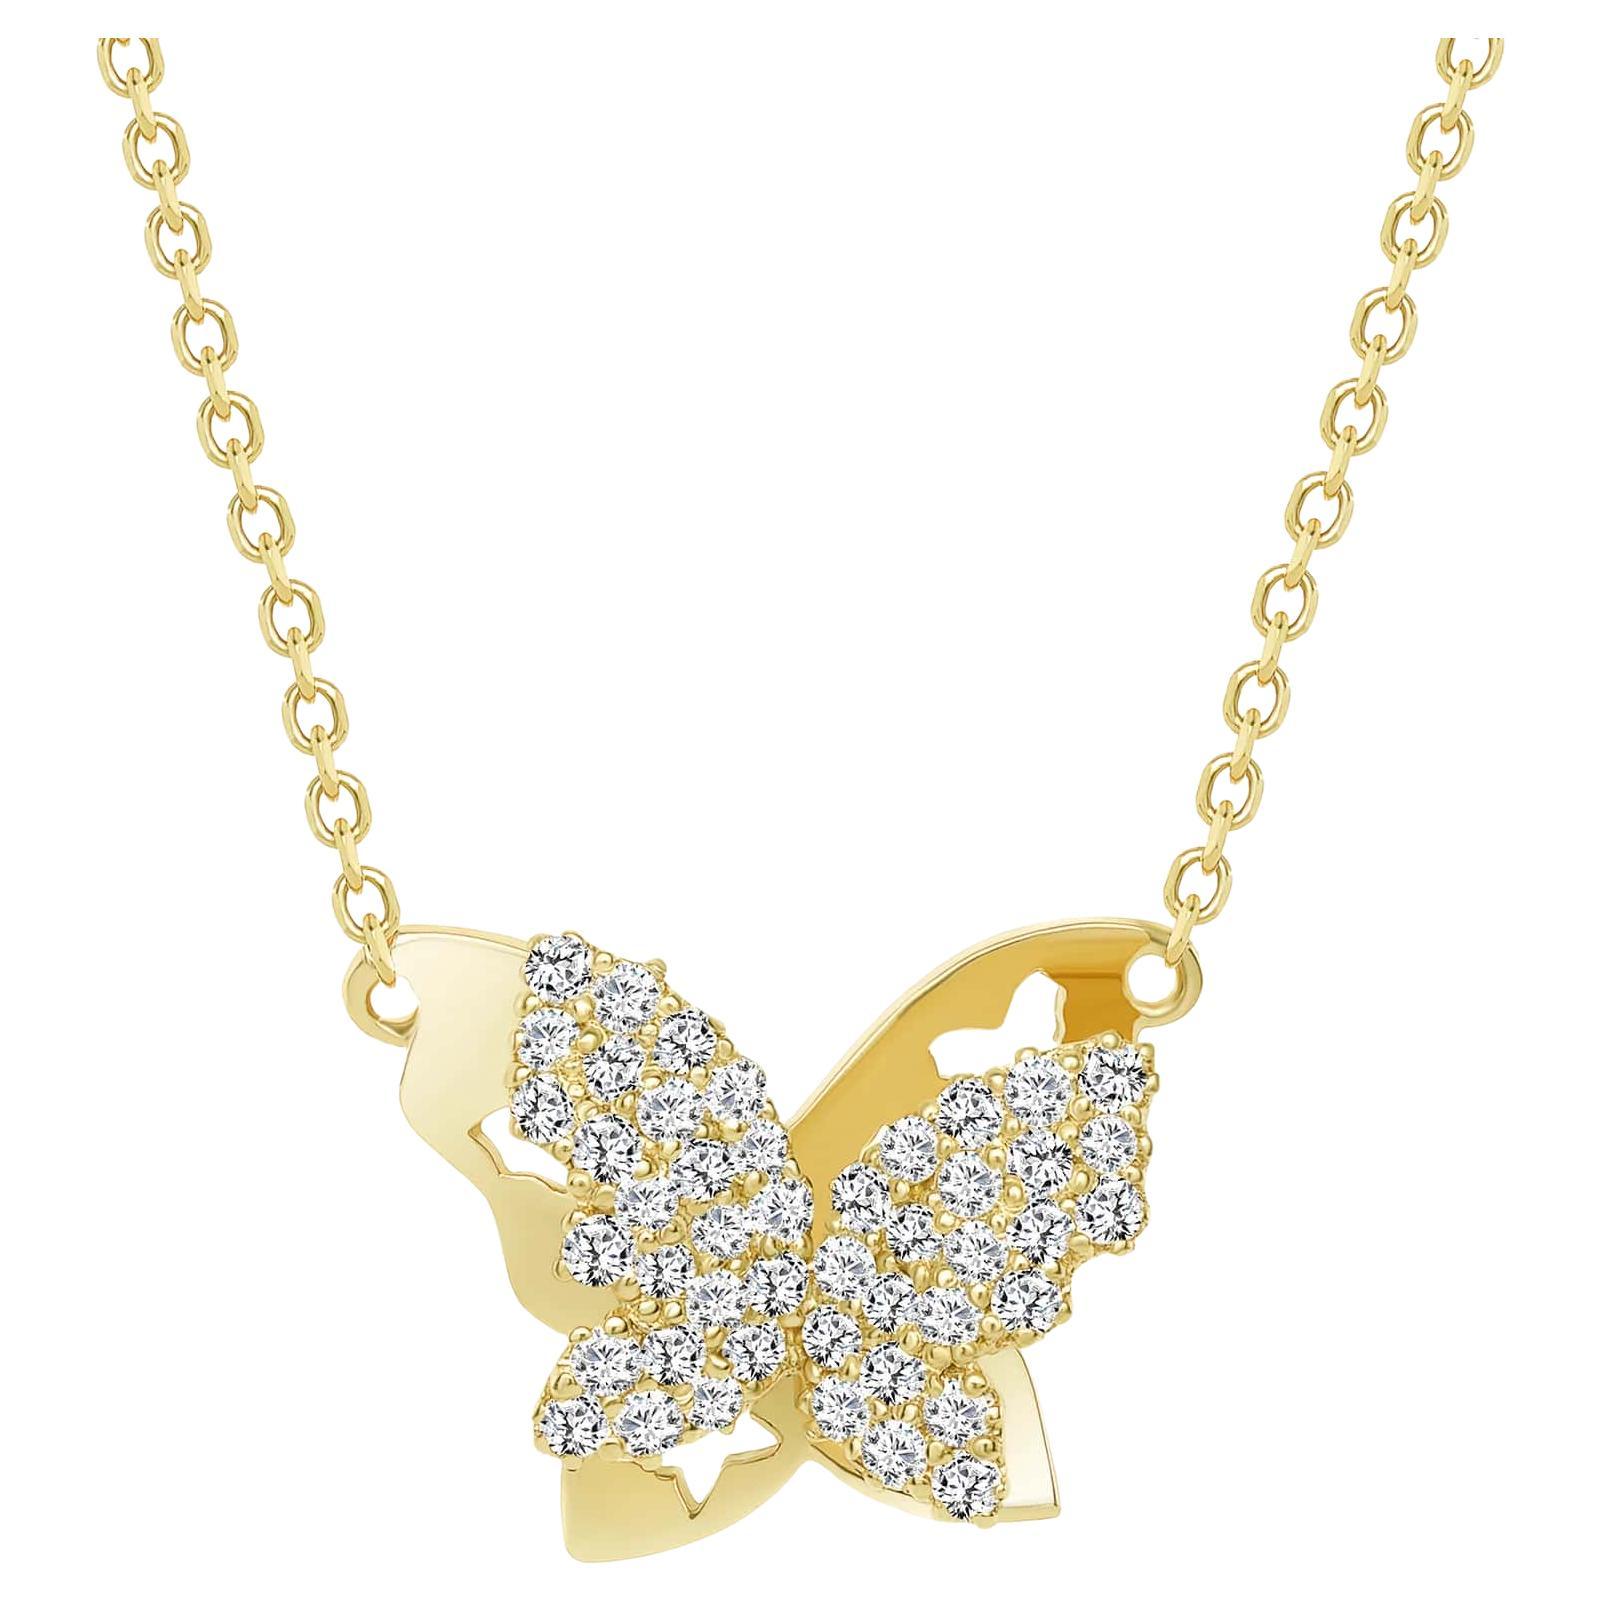 What do butterfly necklaces mean?